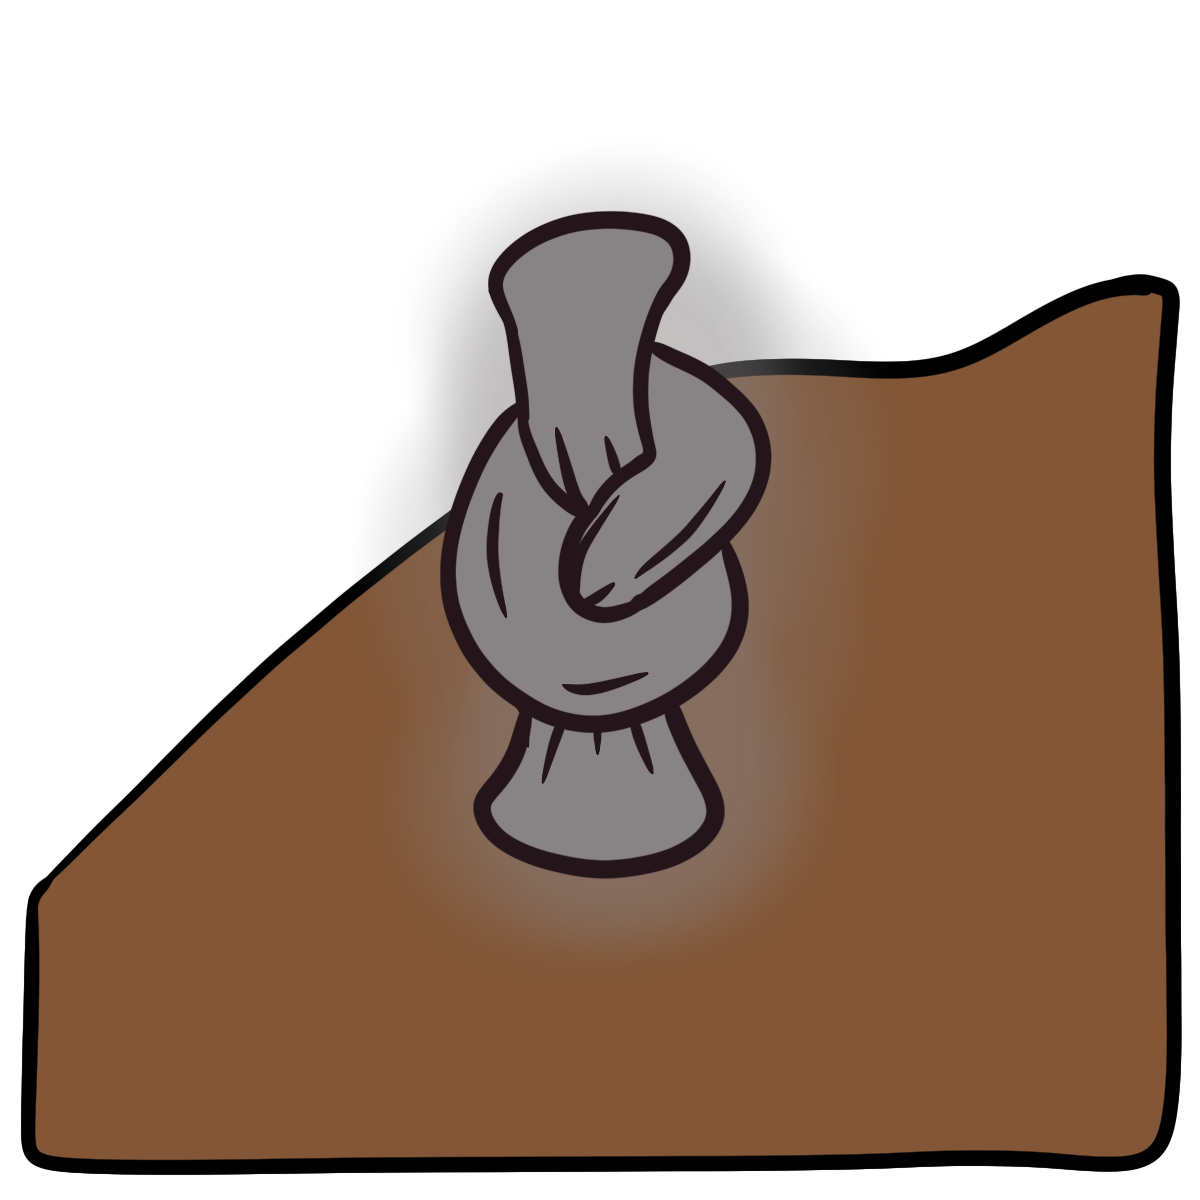 A vertical gray glowing blob tied in a knot in the center. Curved medium brown fills the bottom half of the background.